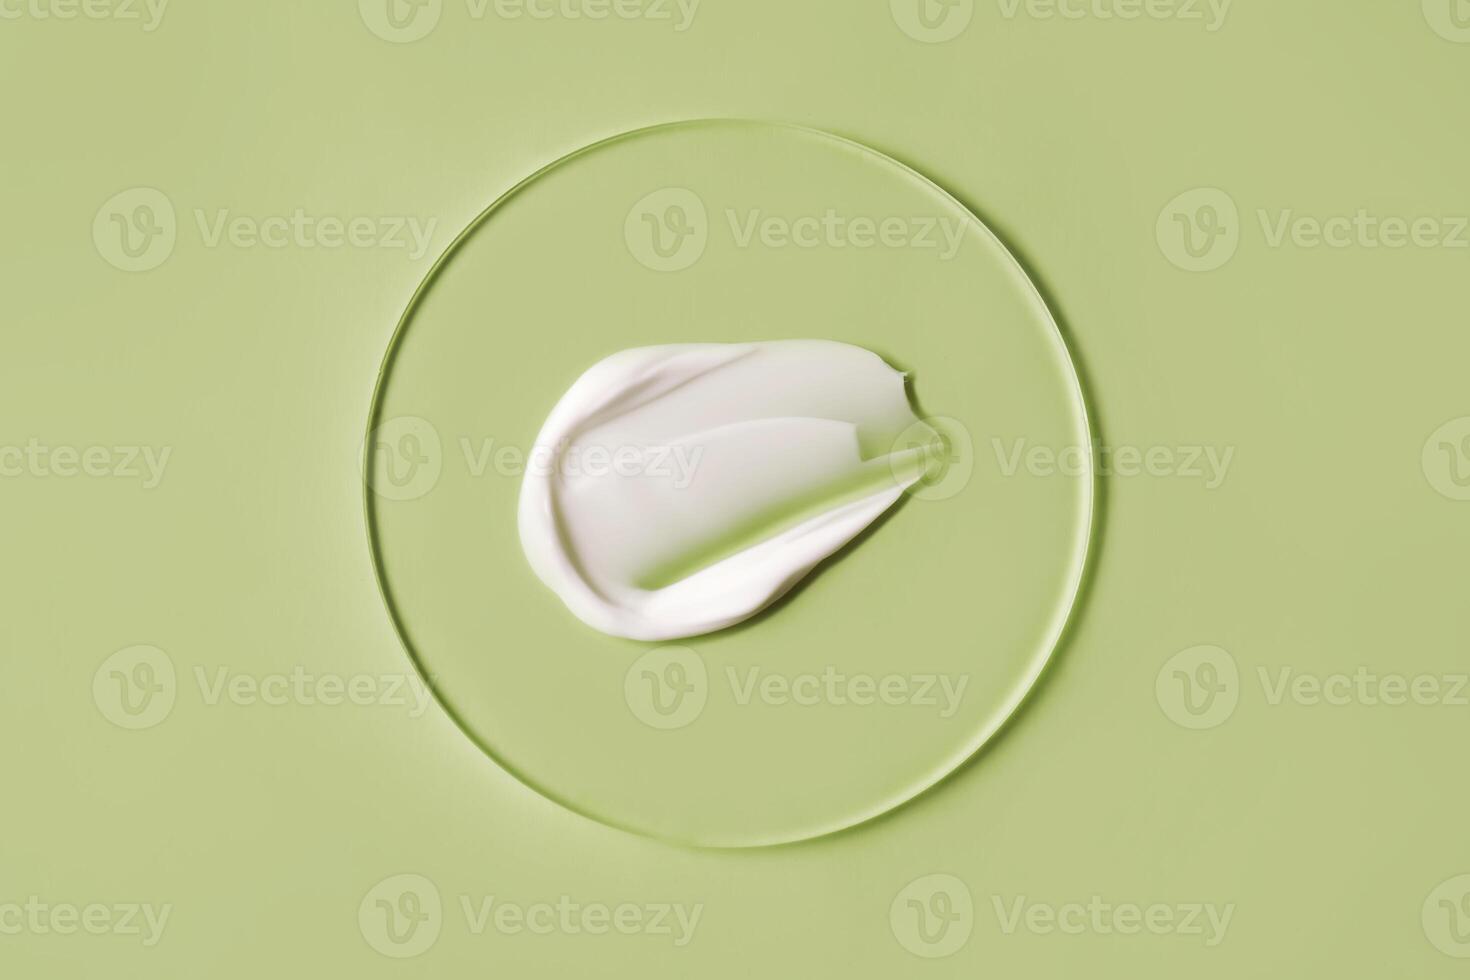 A savory smear of white cream on a green background. photo